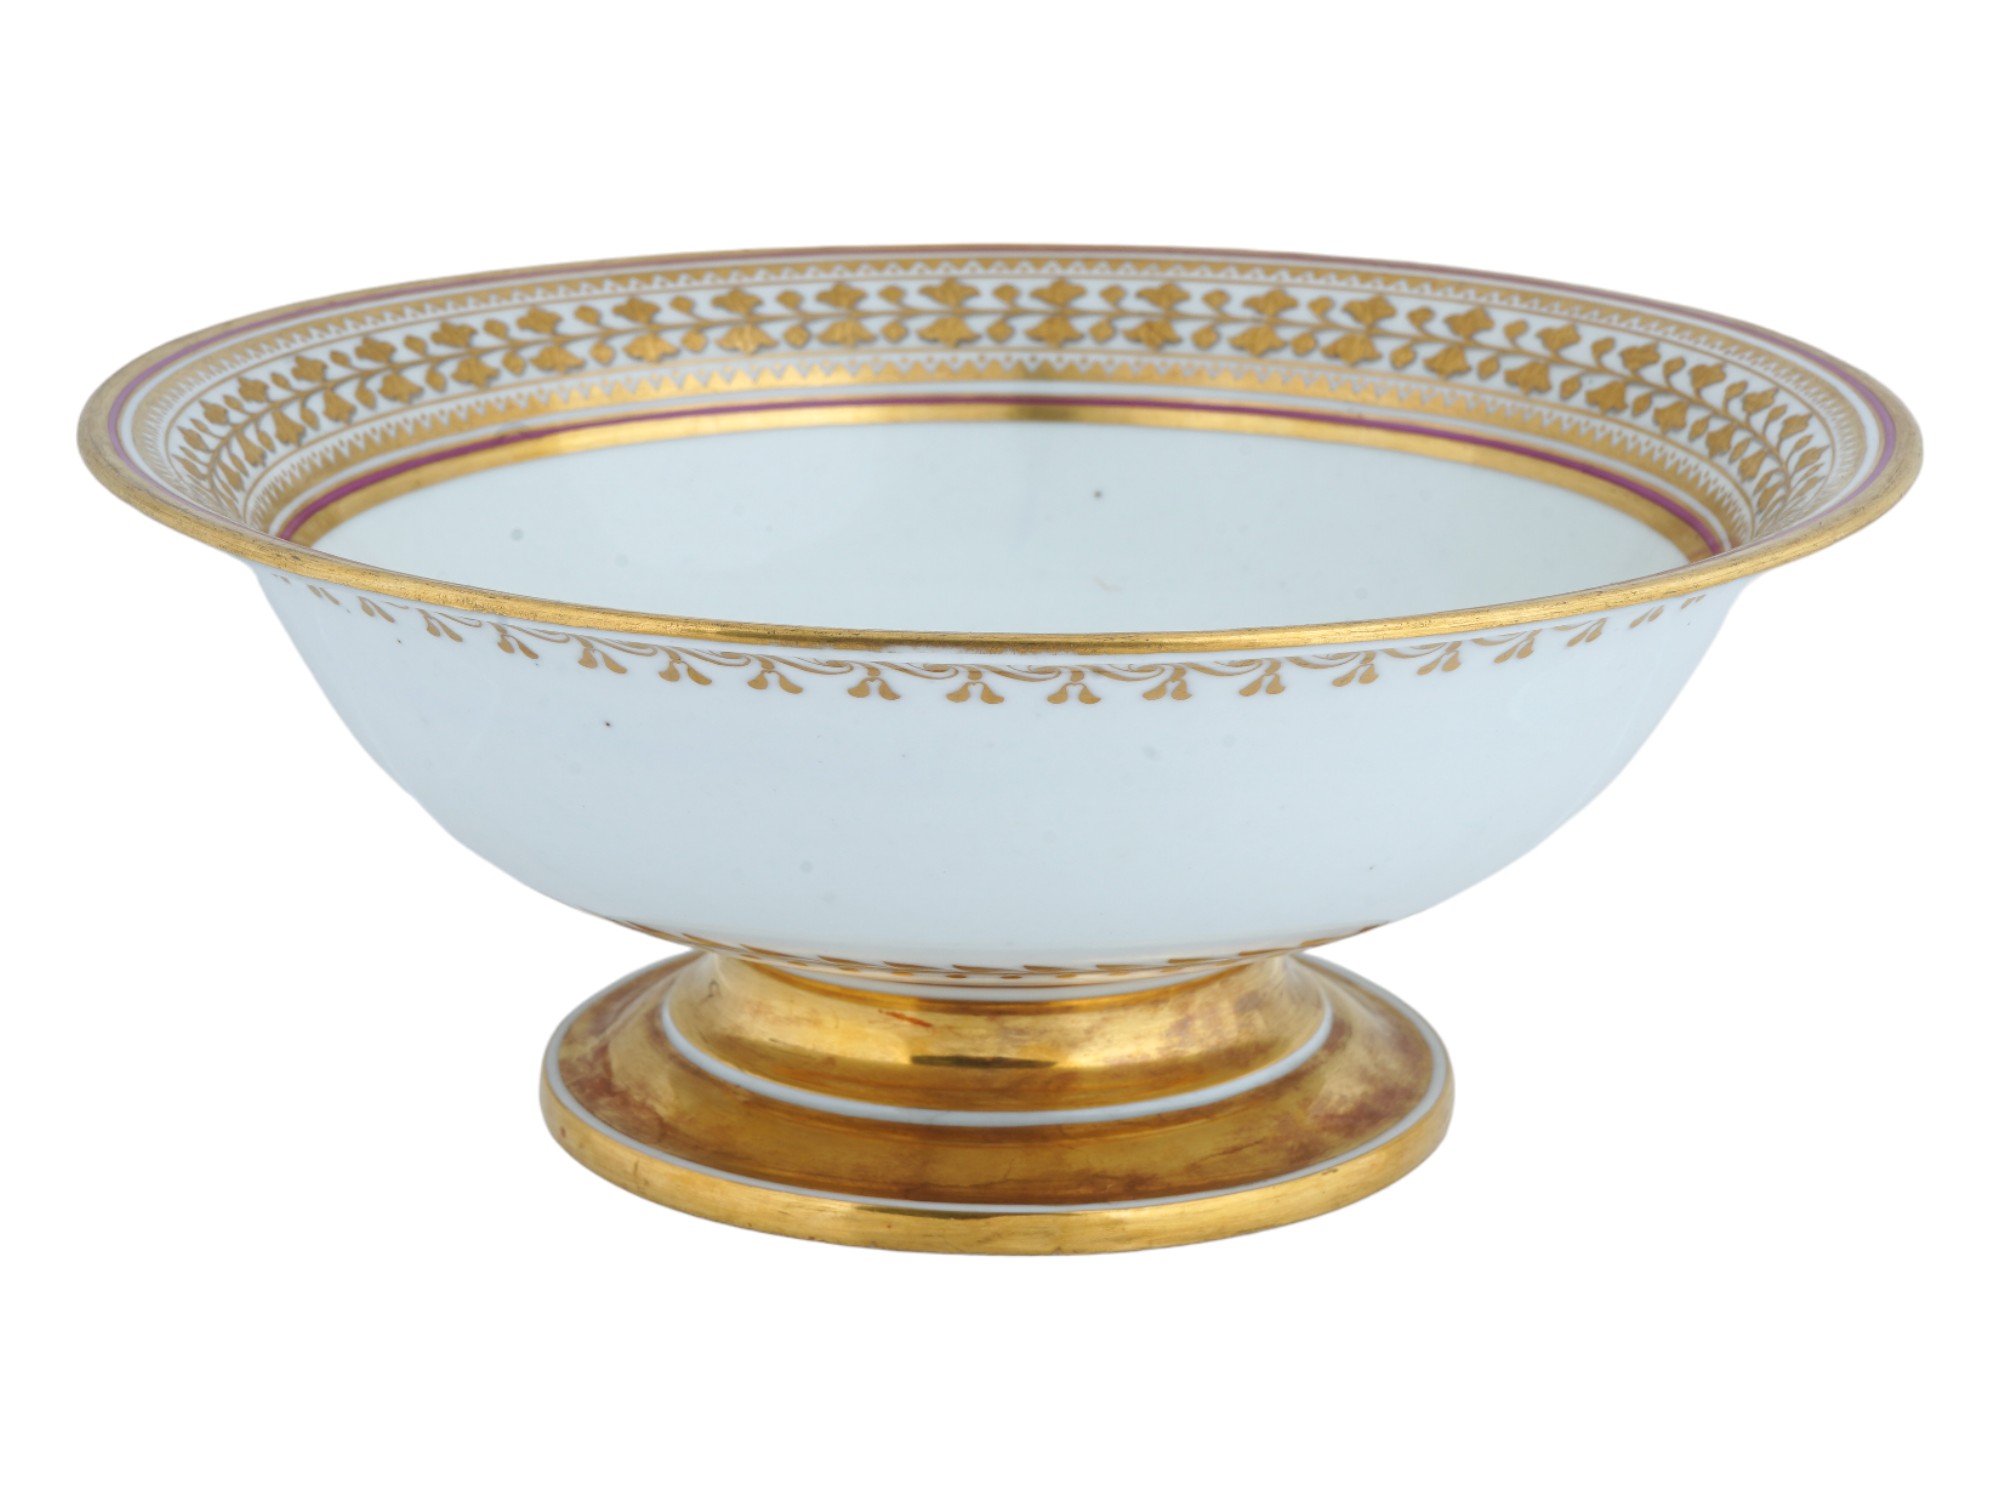 RUSSIAN IMPERIAL PORCELAIN BABIGON FOOTED BOWL PIC-0